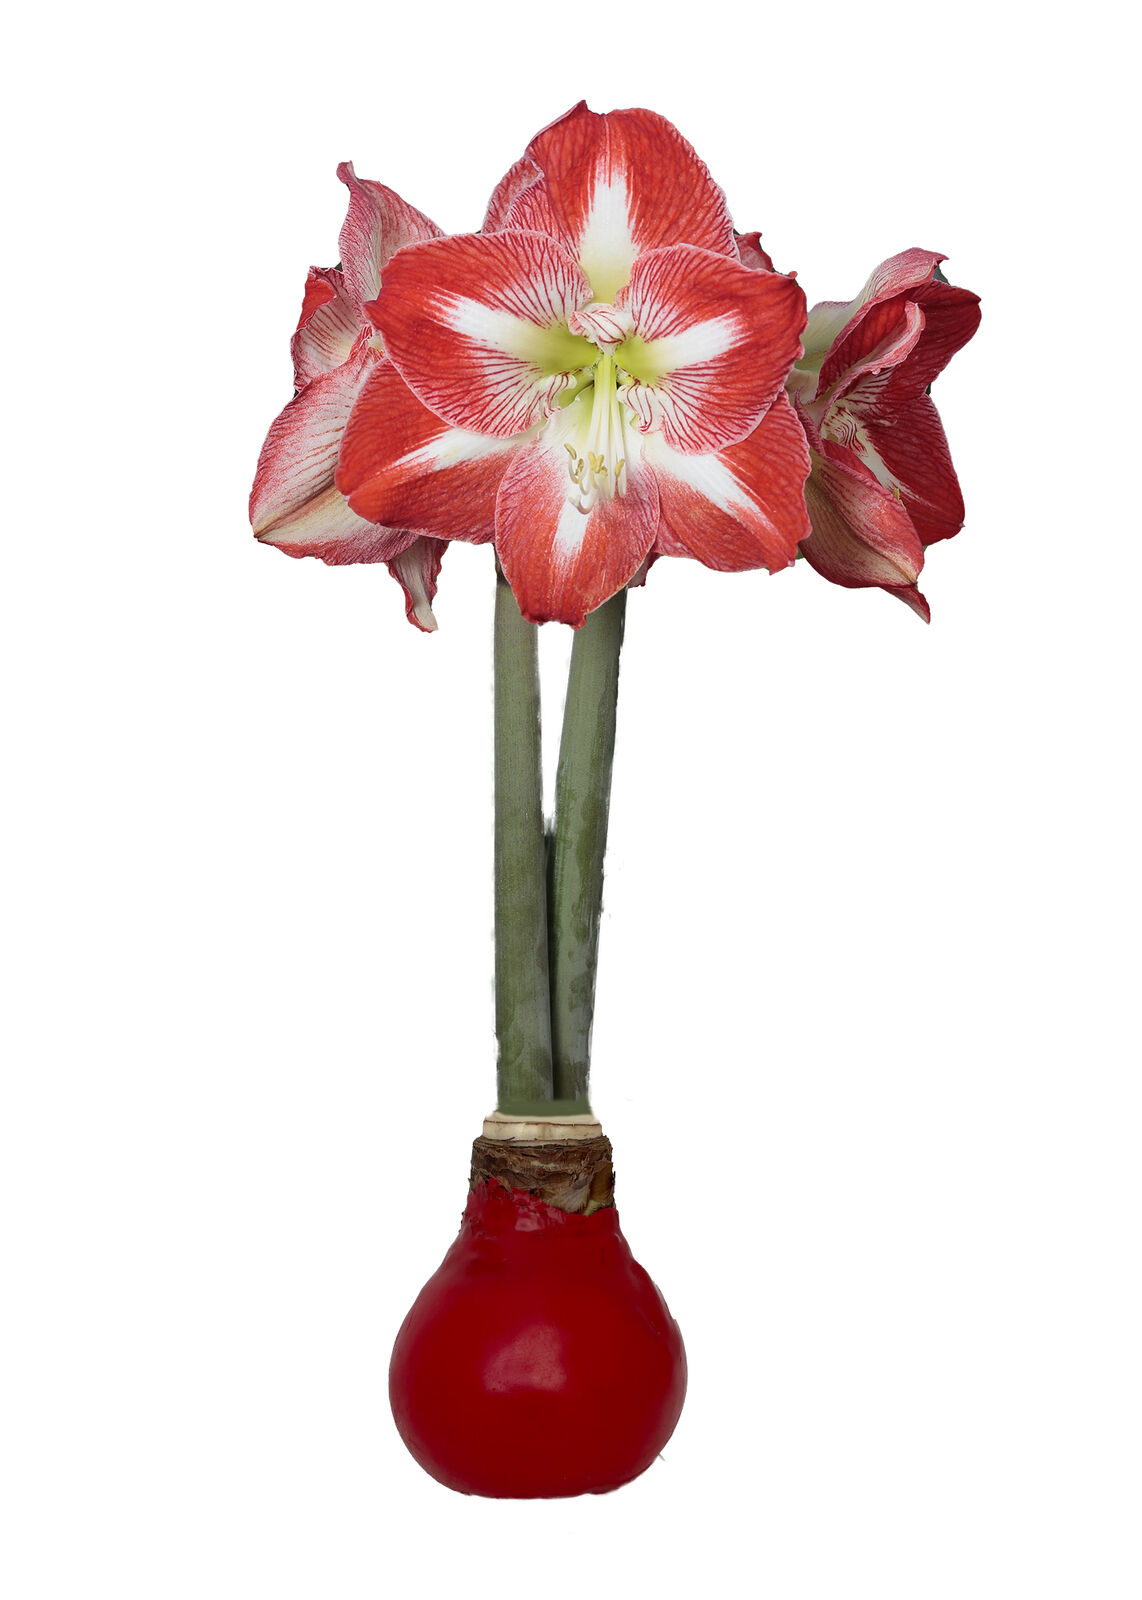 Minerva Red Waxed Jumbo Amaryllis - Immediate Shipping for Holiday Blooms